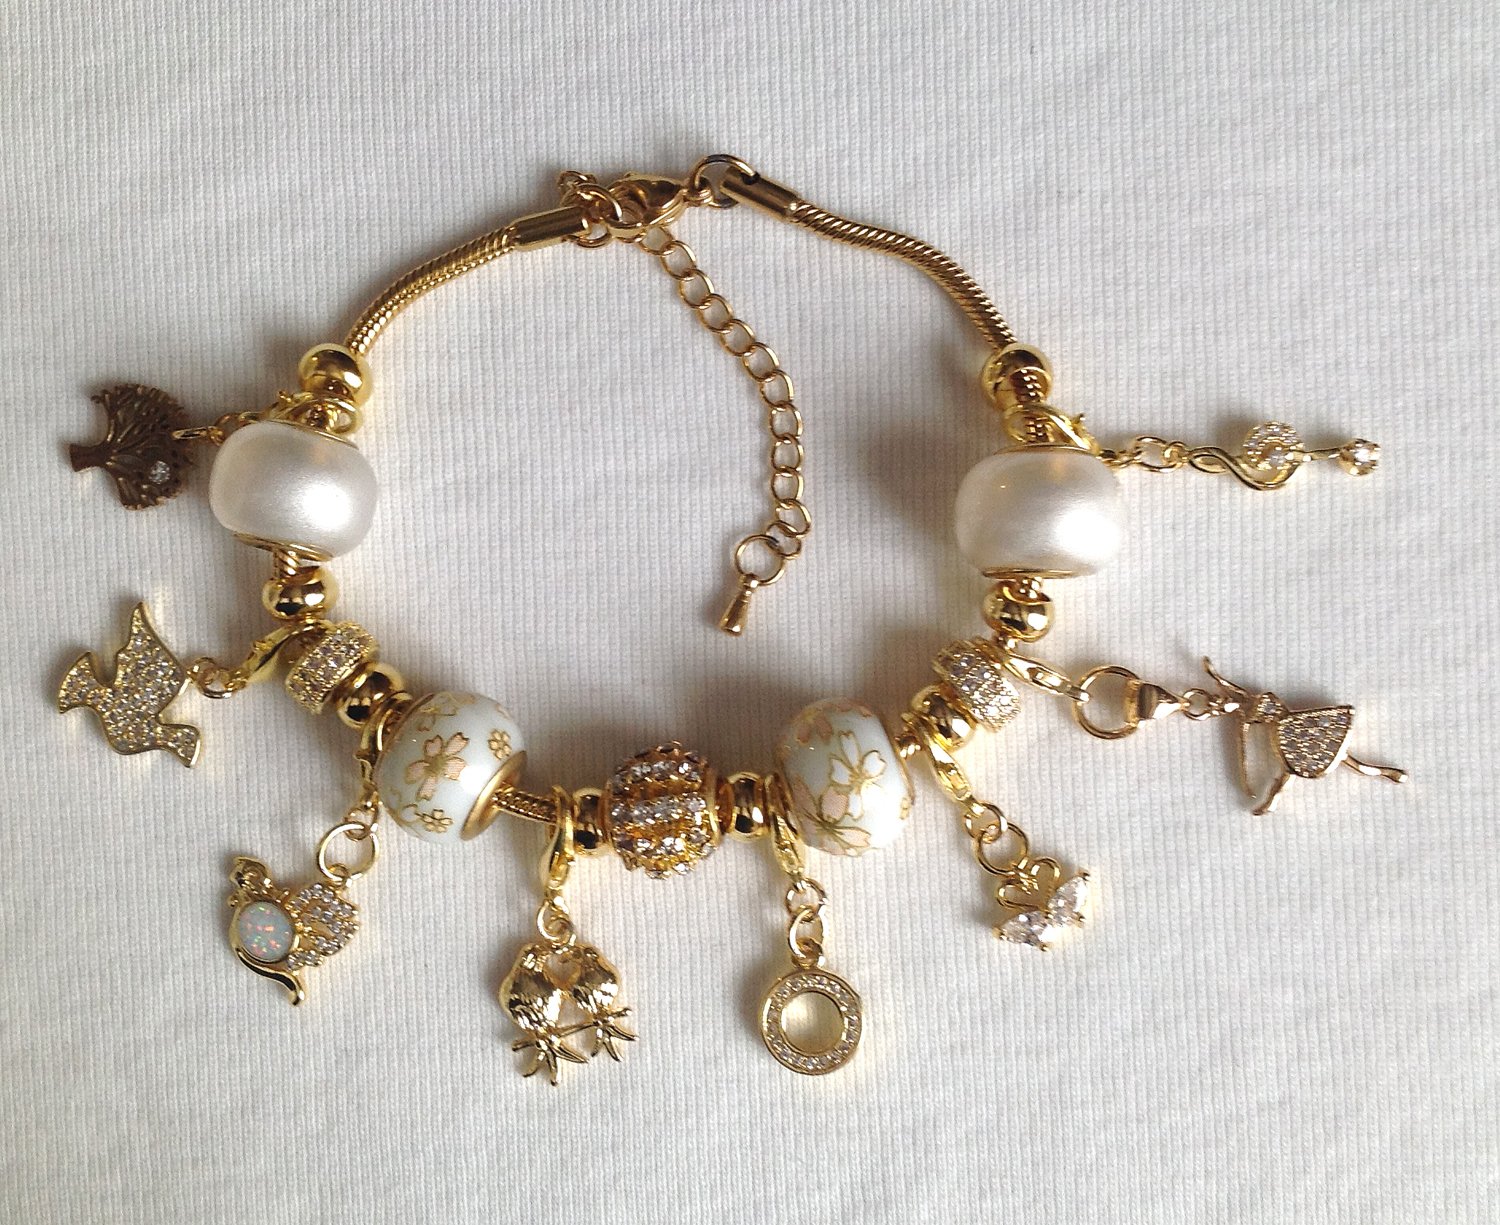 Days of Christmas Cubic Zirconia European Style Charm Bracelet in Gold and White